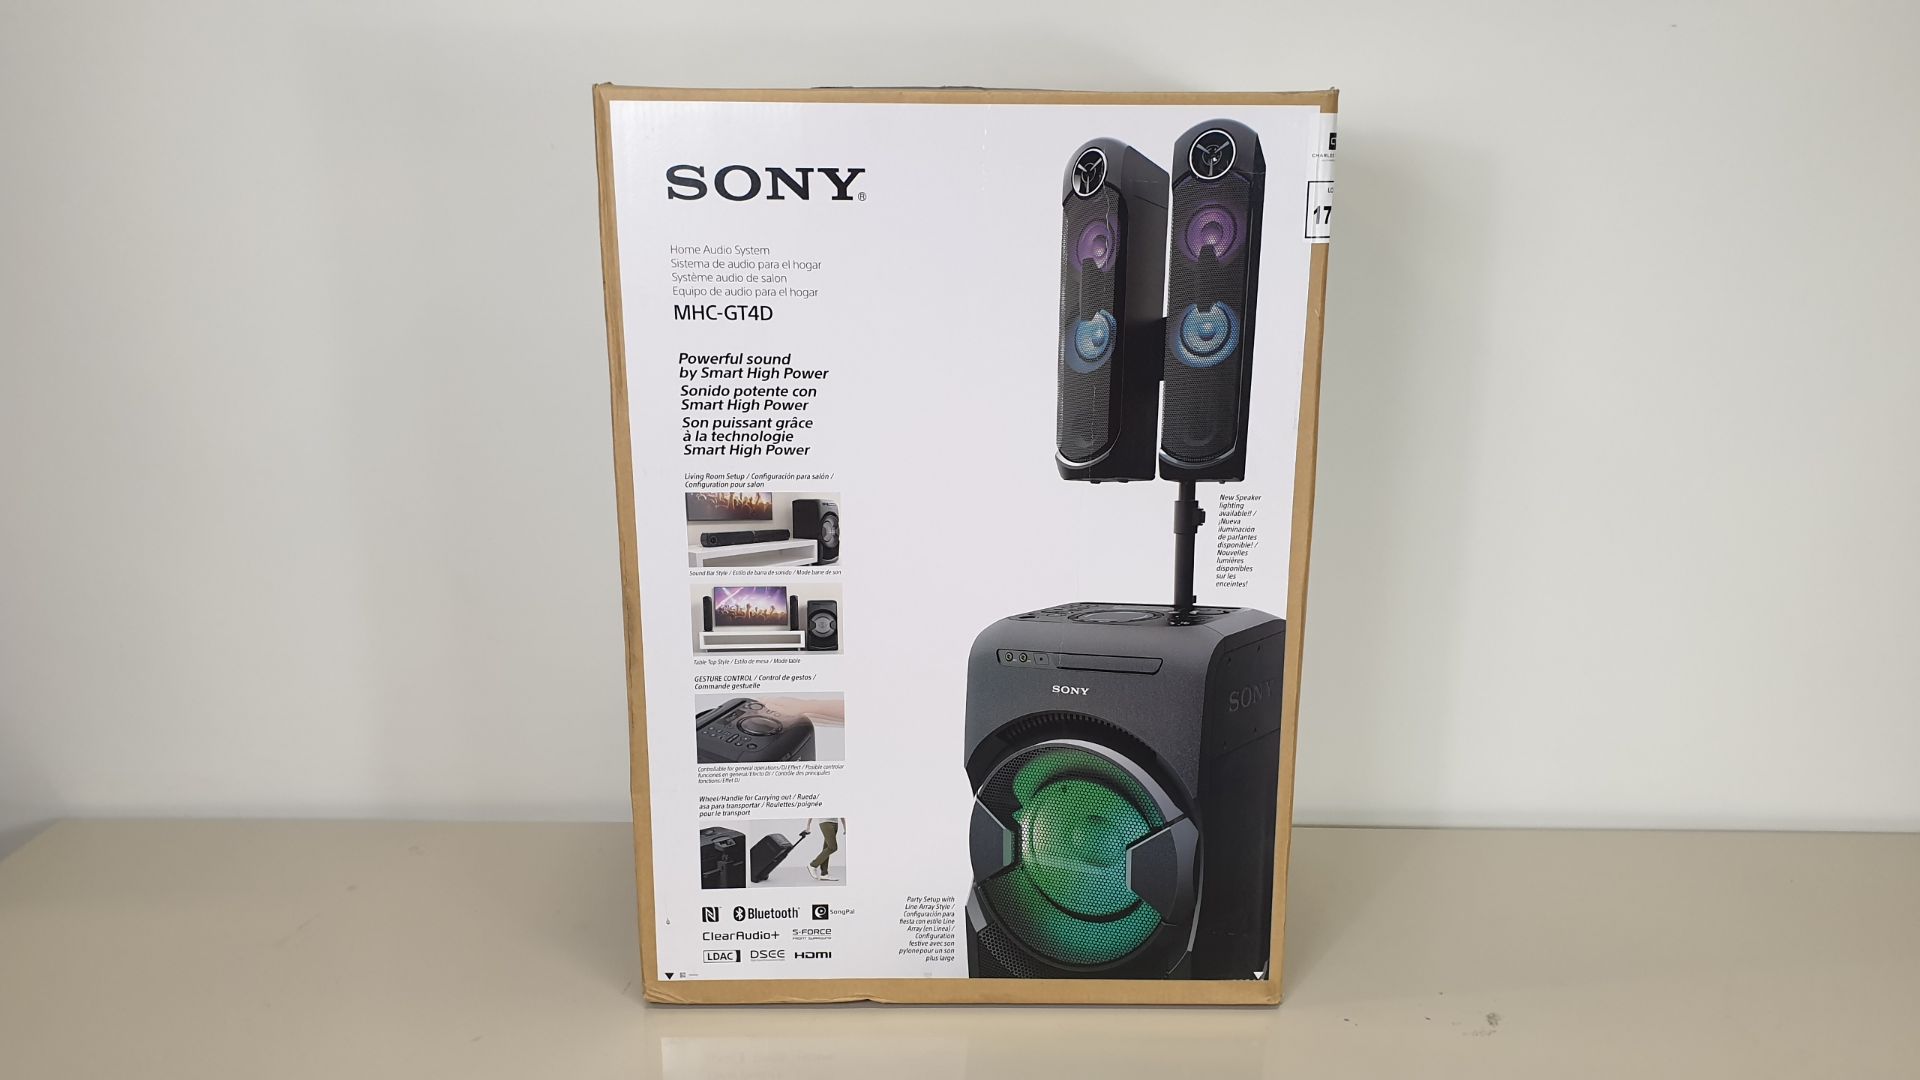 BRAND NEW BOXED SONY HOME AUDIO SYSTEM (MHC-GT4D) - WITH POWERFUL SOUND BY SMART HIGH POWER.